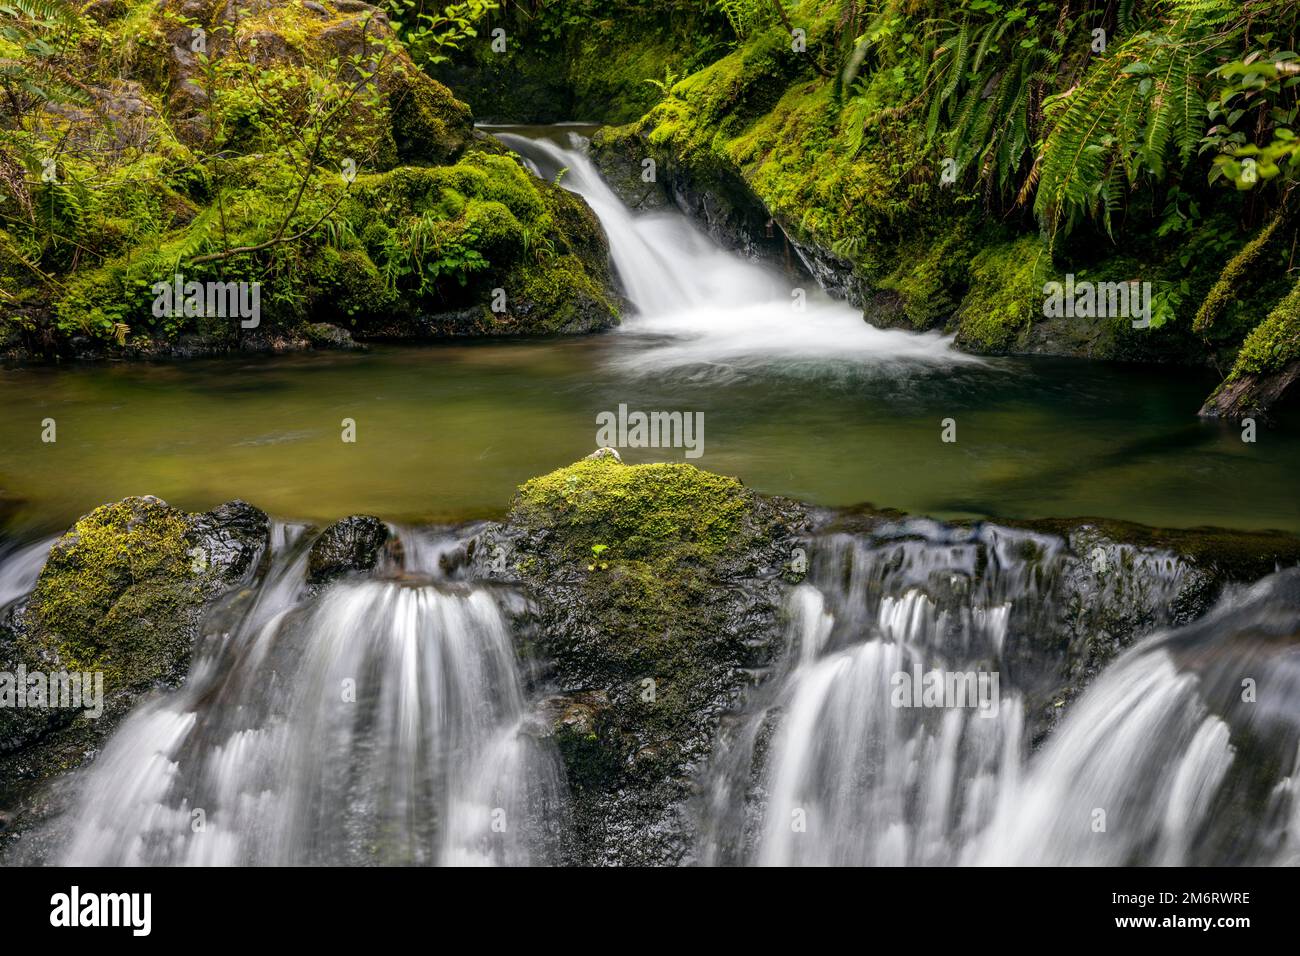 WA20849-00..... WASHINGTON - Cascade Creek Falls in the Quinault Valley, Olympic National Forest. Stock Photo